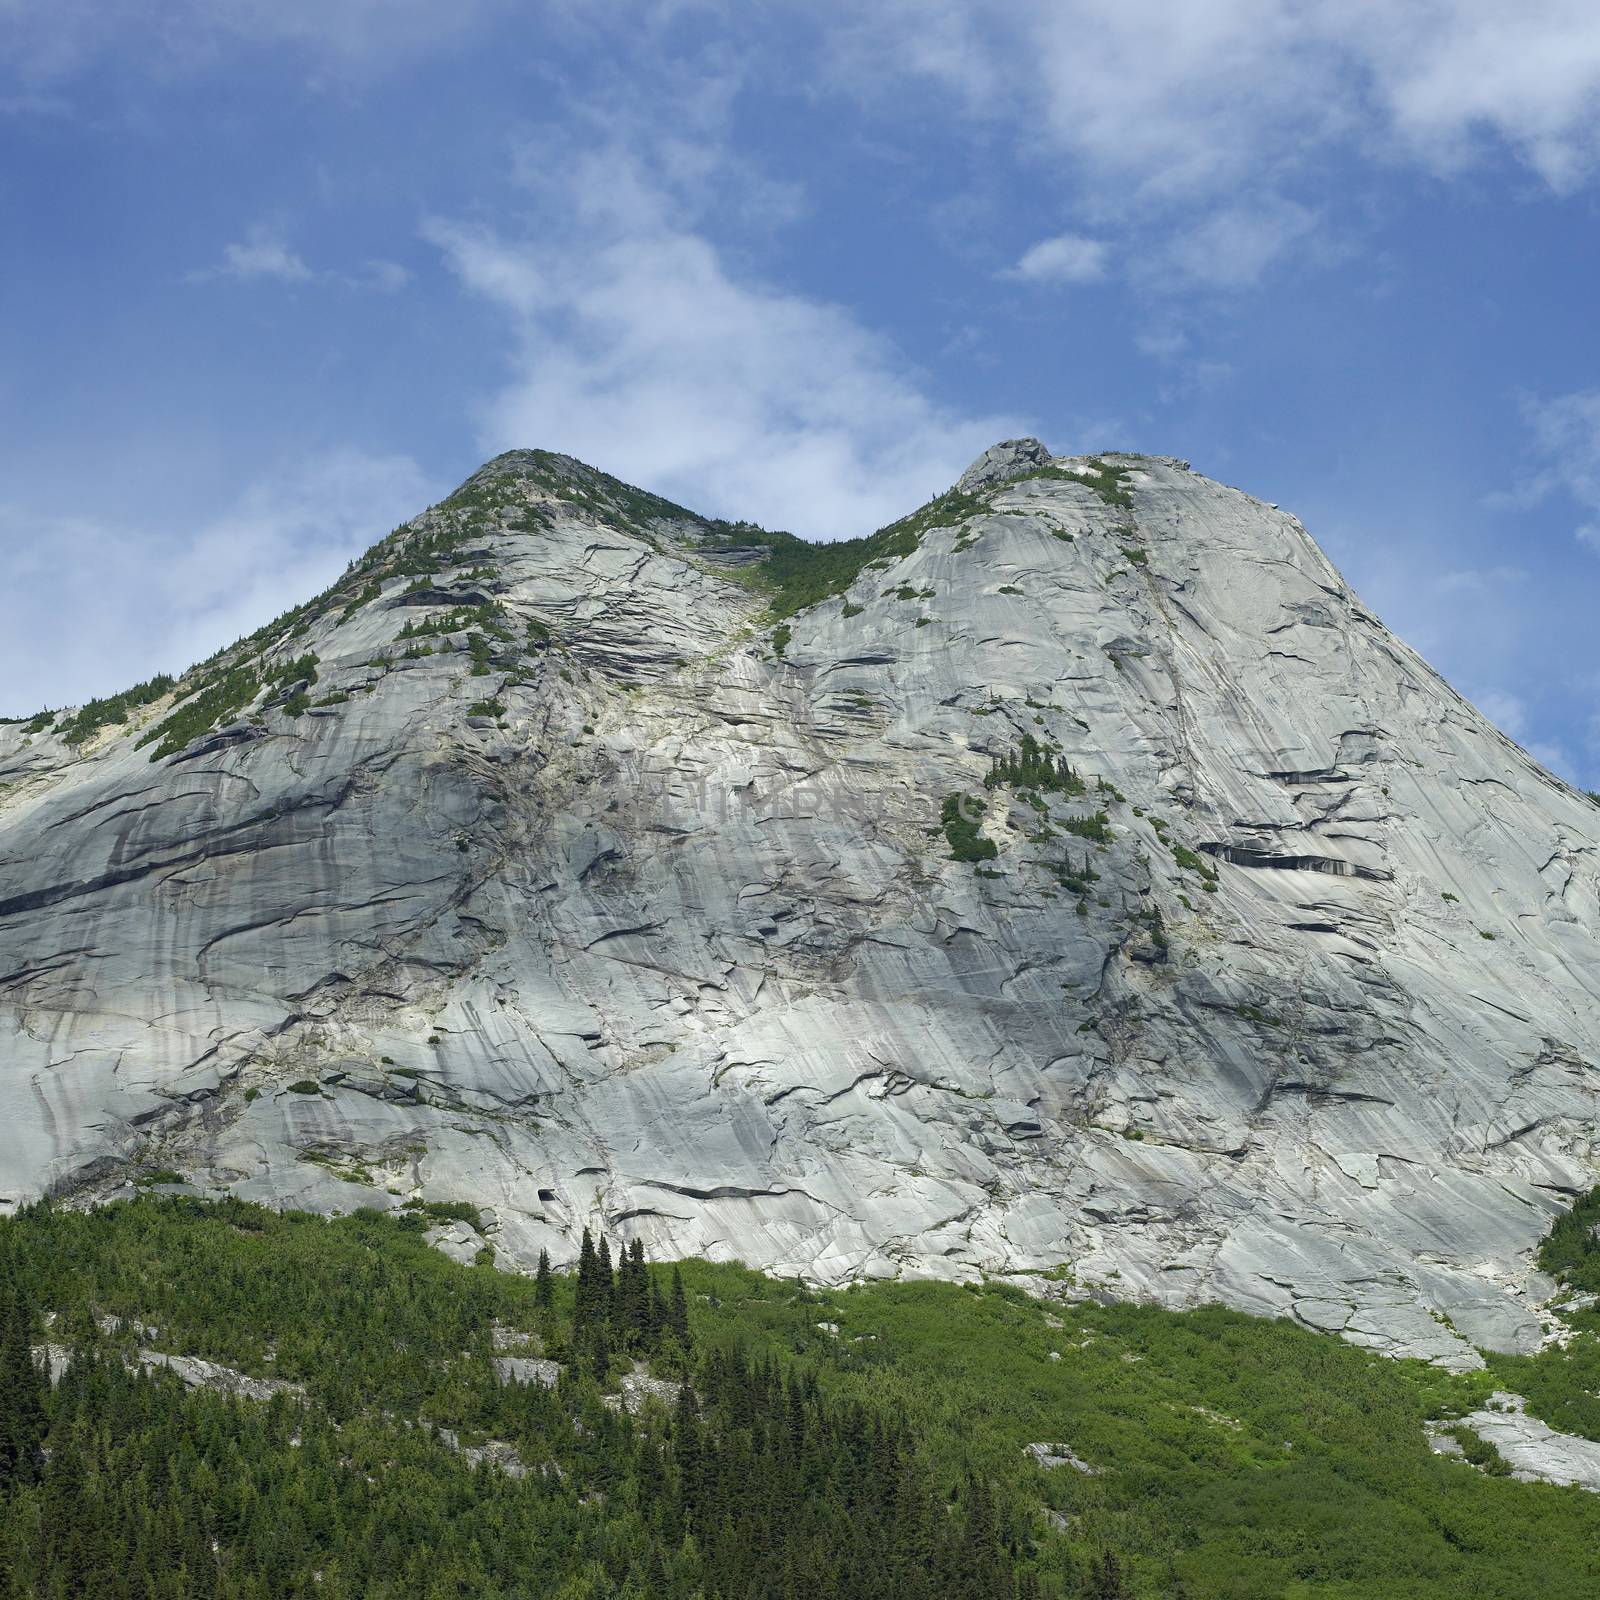 Sheer face of a rocky mountain with green trees in the foreground